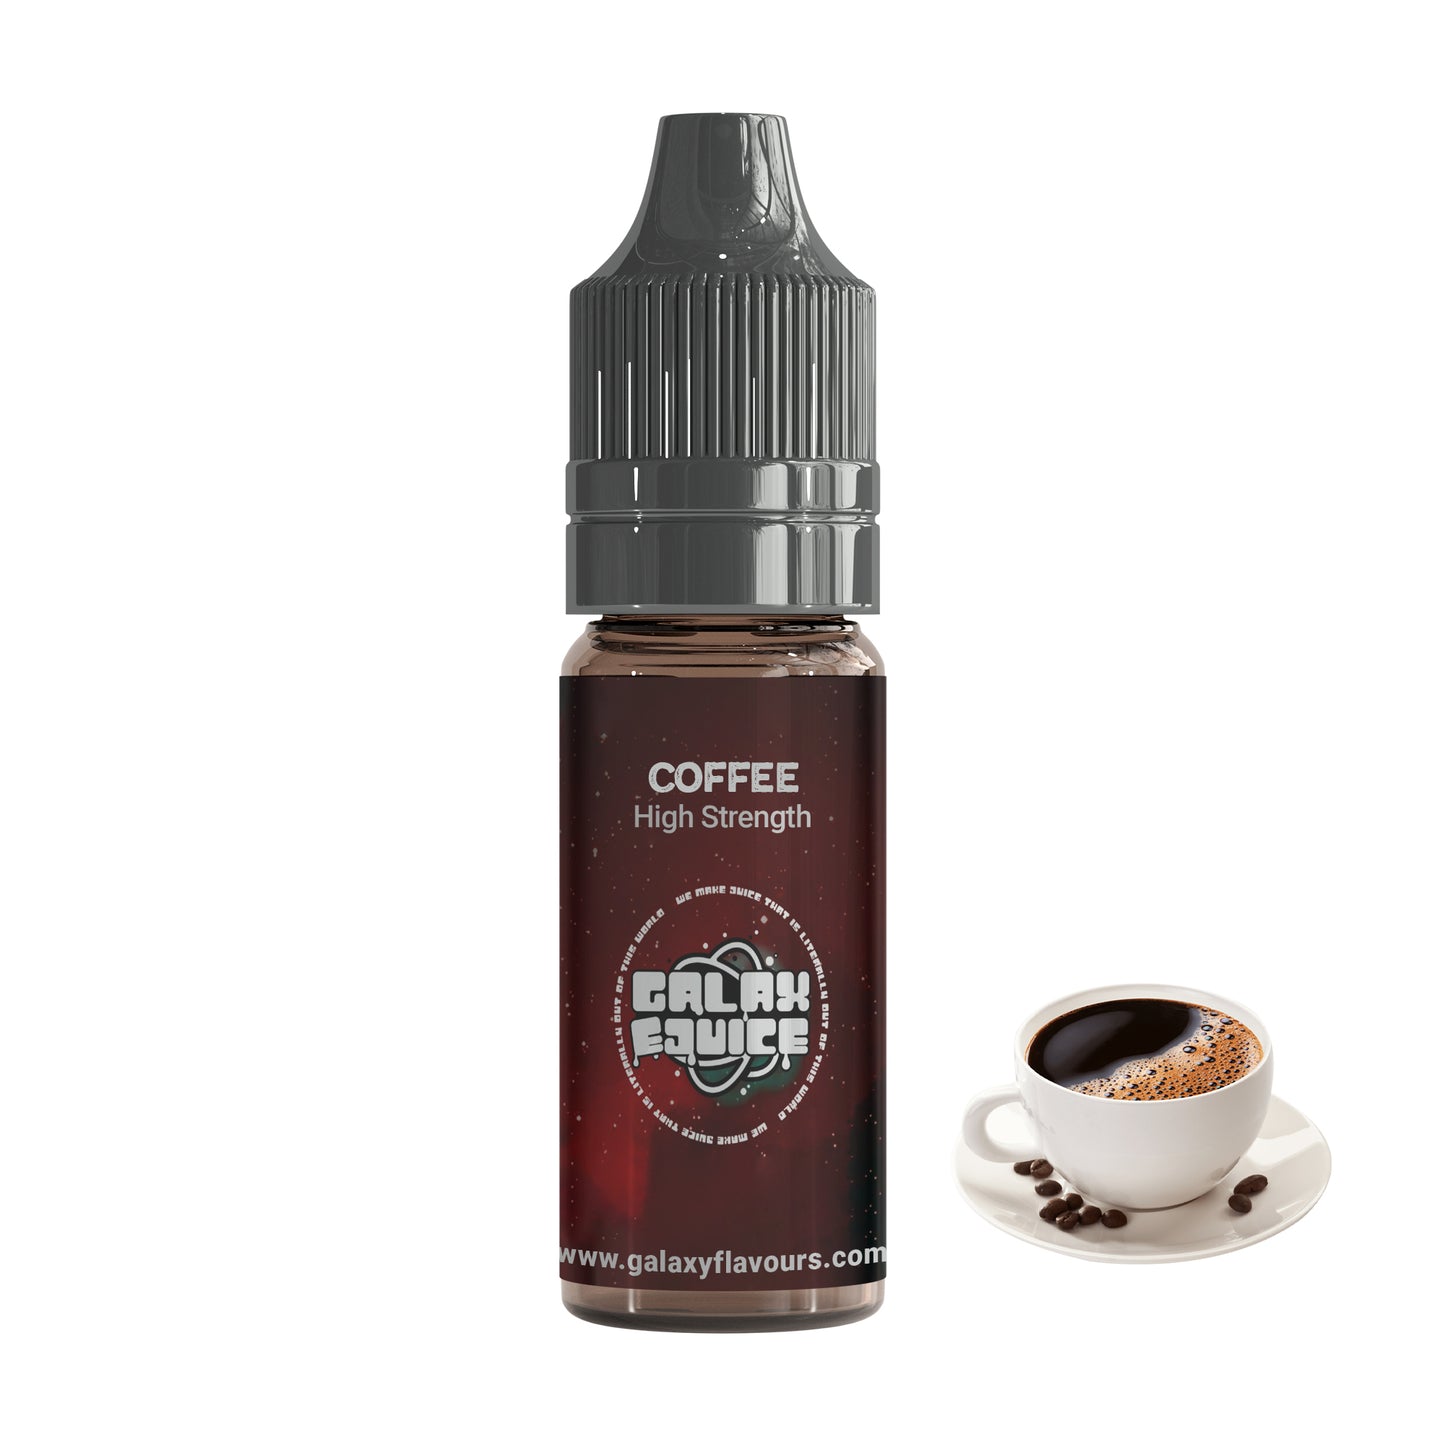 Coffee High Strength Professional Flavouring.